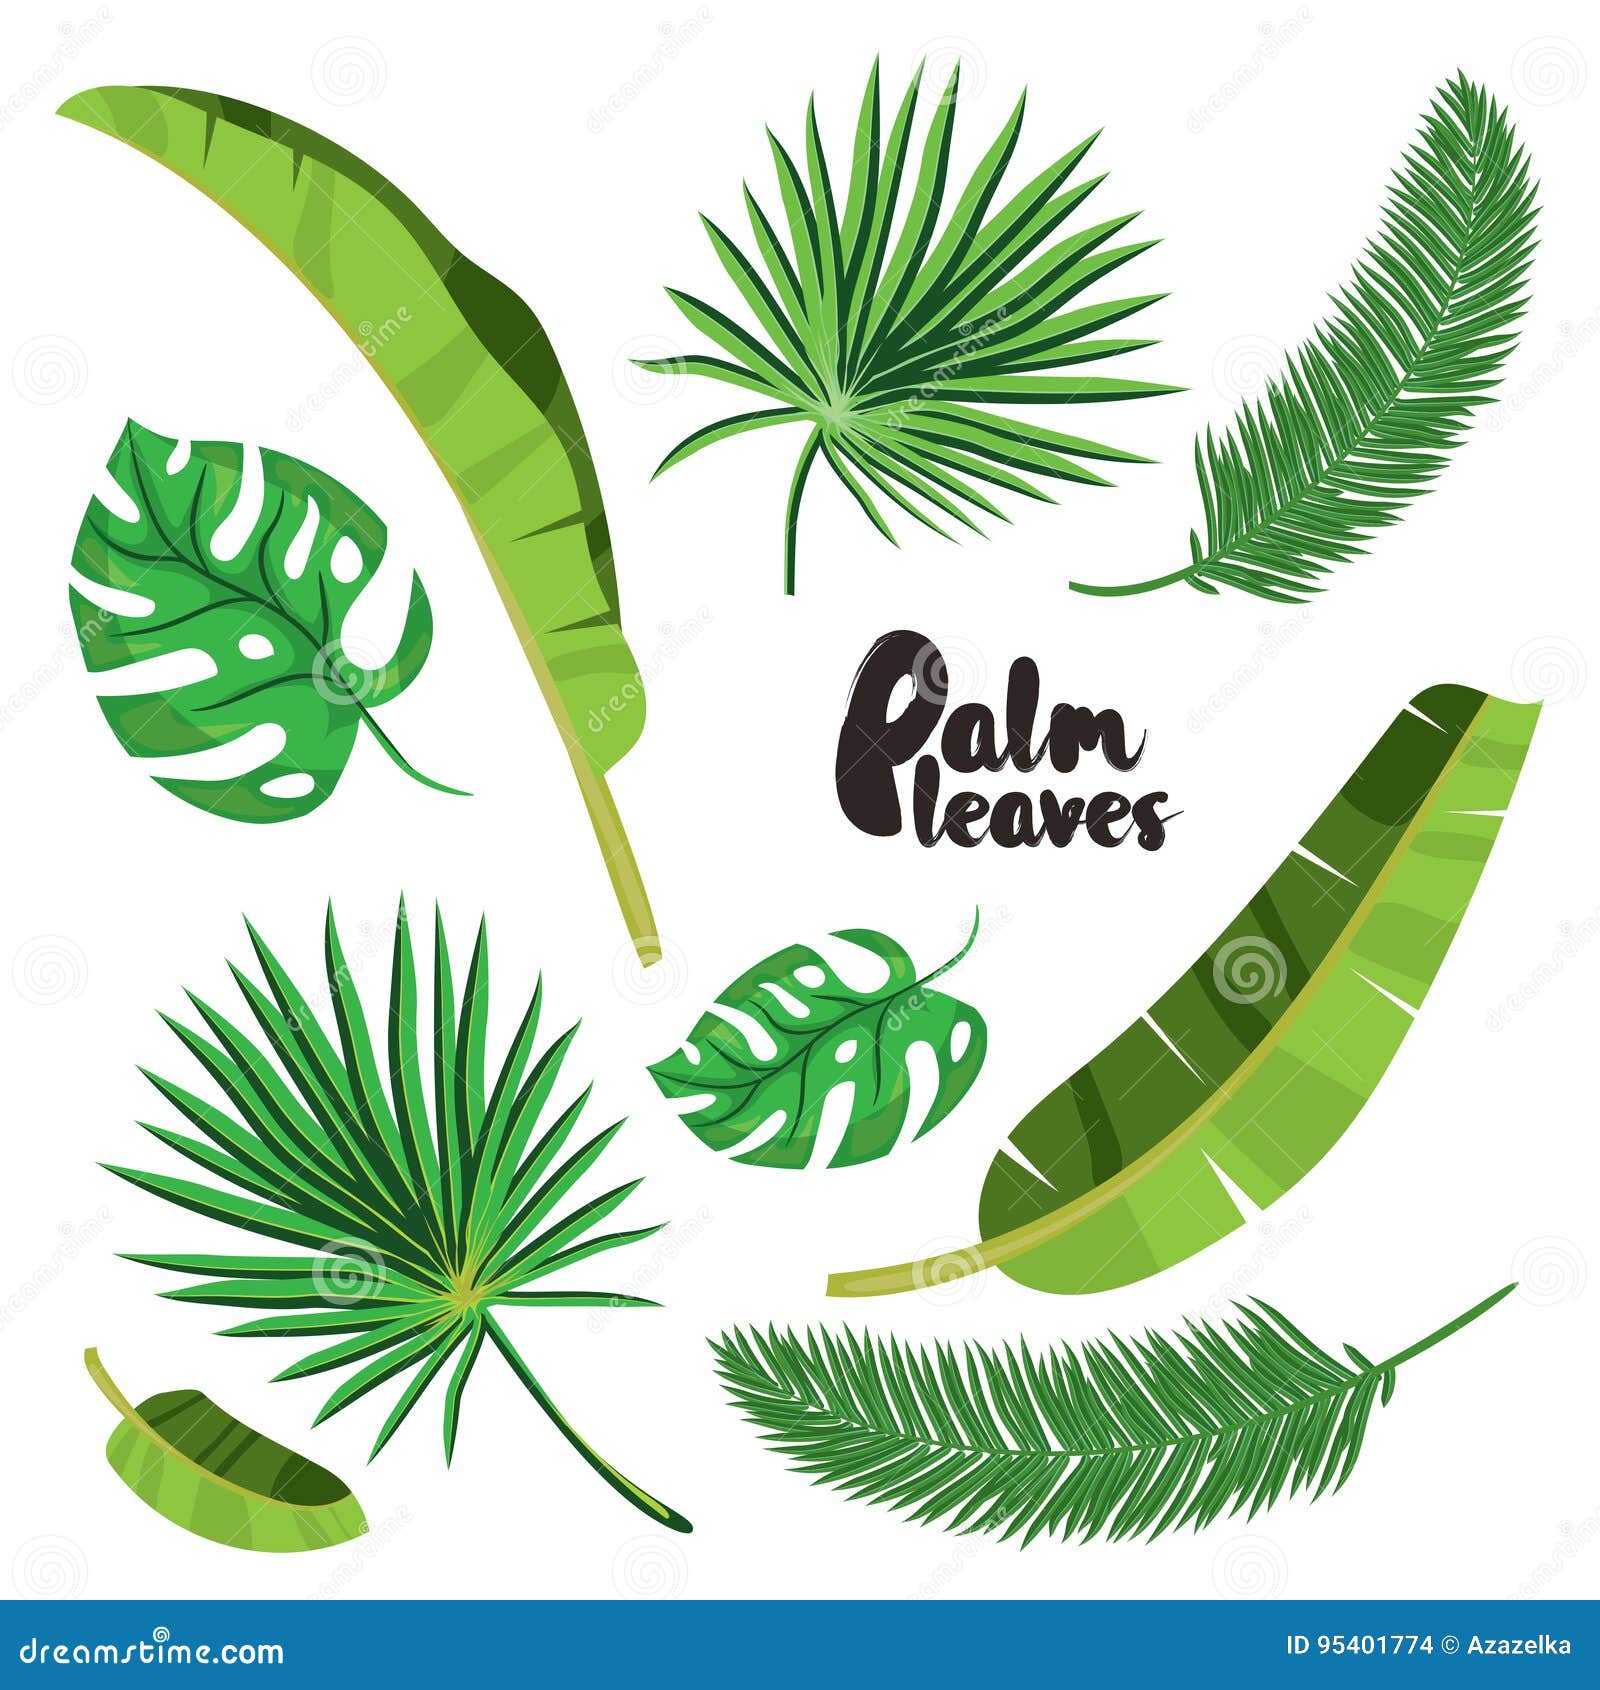 Cartoon Tropical Palm Leaves Set. Vector Illustrated on White Background.  Flat Vector Hand Drawn Palm Tree Elements Stock Vector - Illustration of  banana, hawaii: 95401774